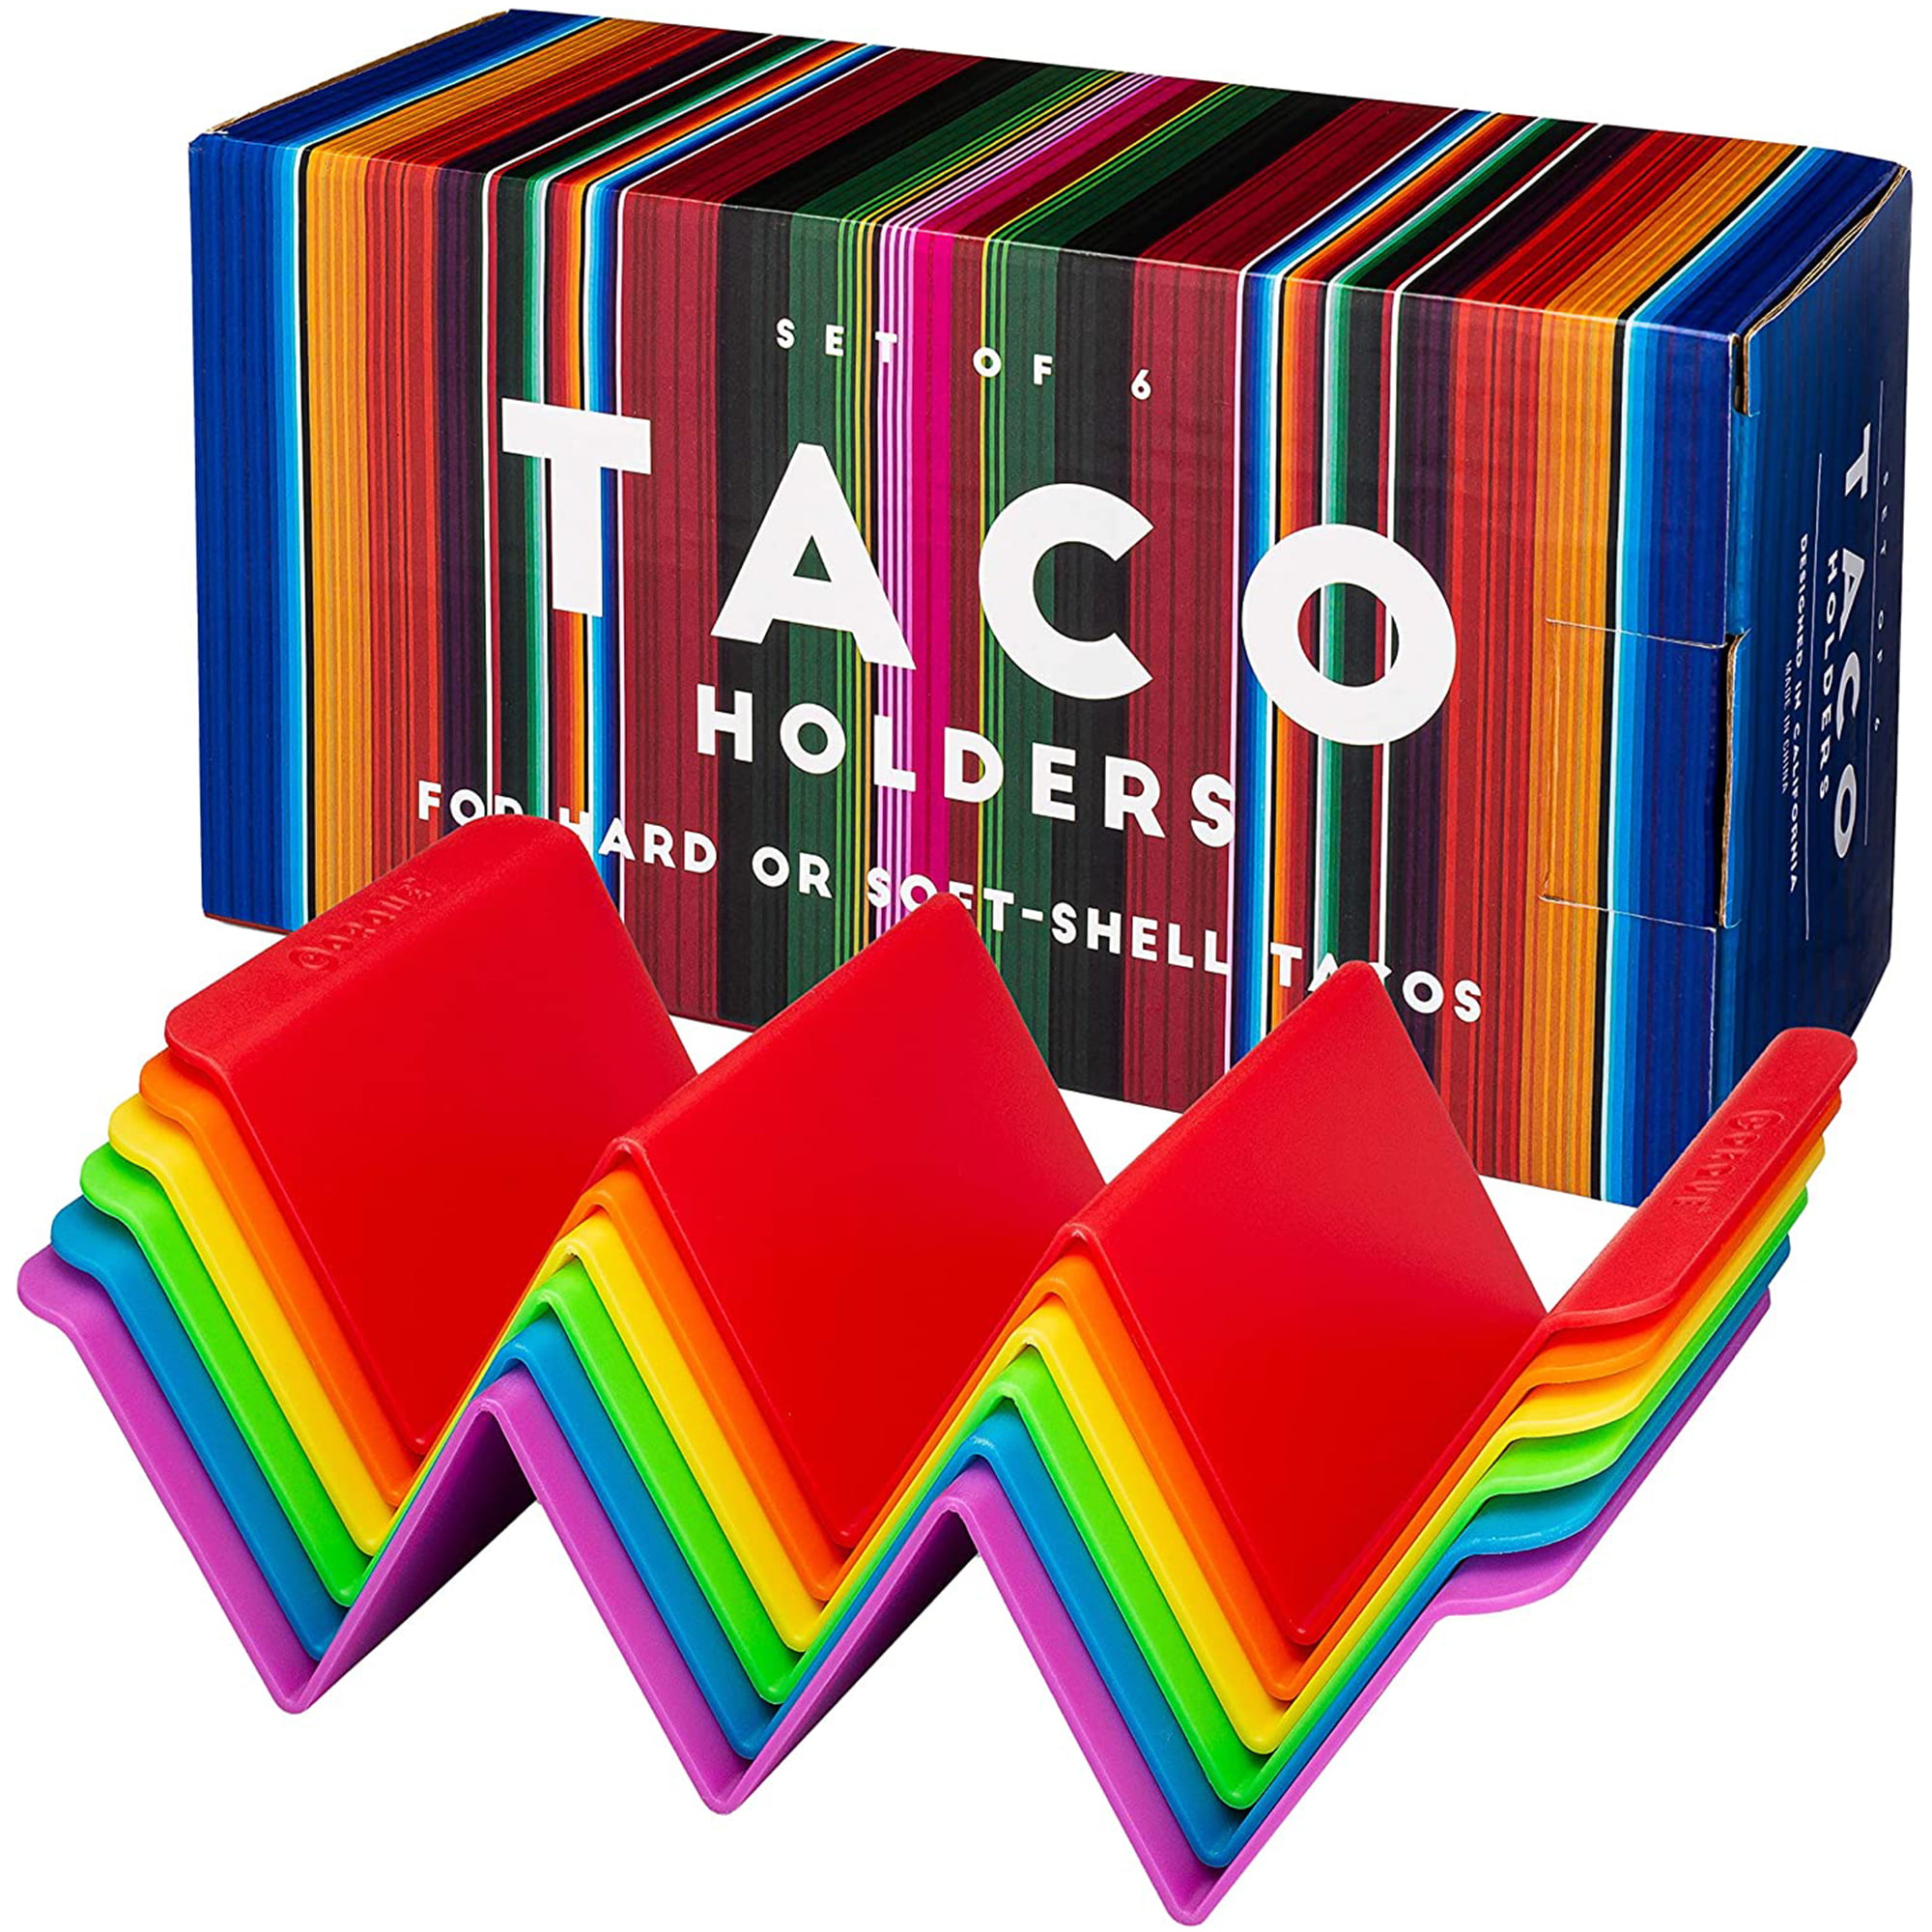 2lb depot taco holder, taco stand, taco rack, premium 18/8 stainless steel, taco  holders hold 2 hard or soft shell tacos, set of two - Walmart.com